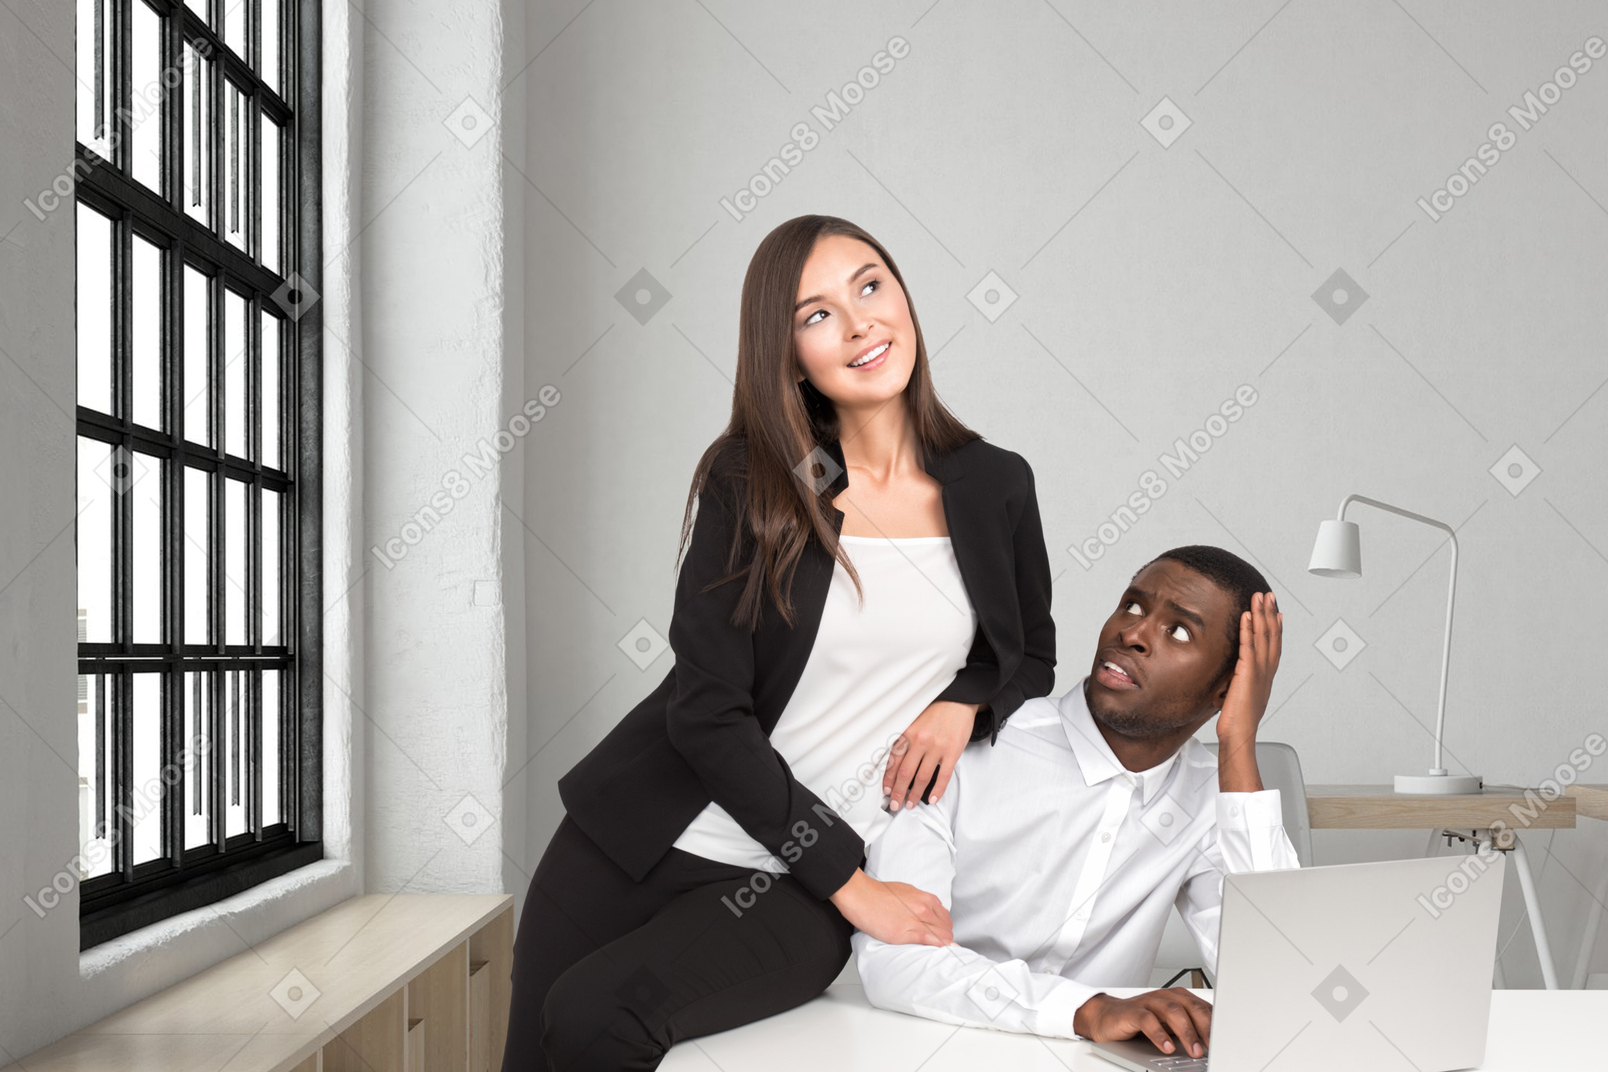 Woman leaning on confused colleague